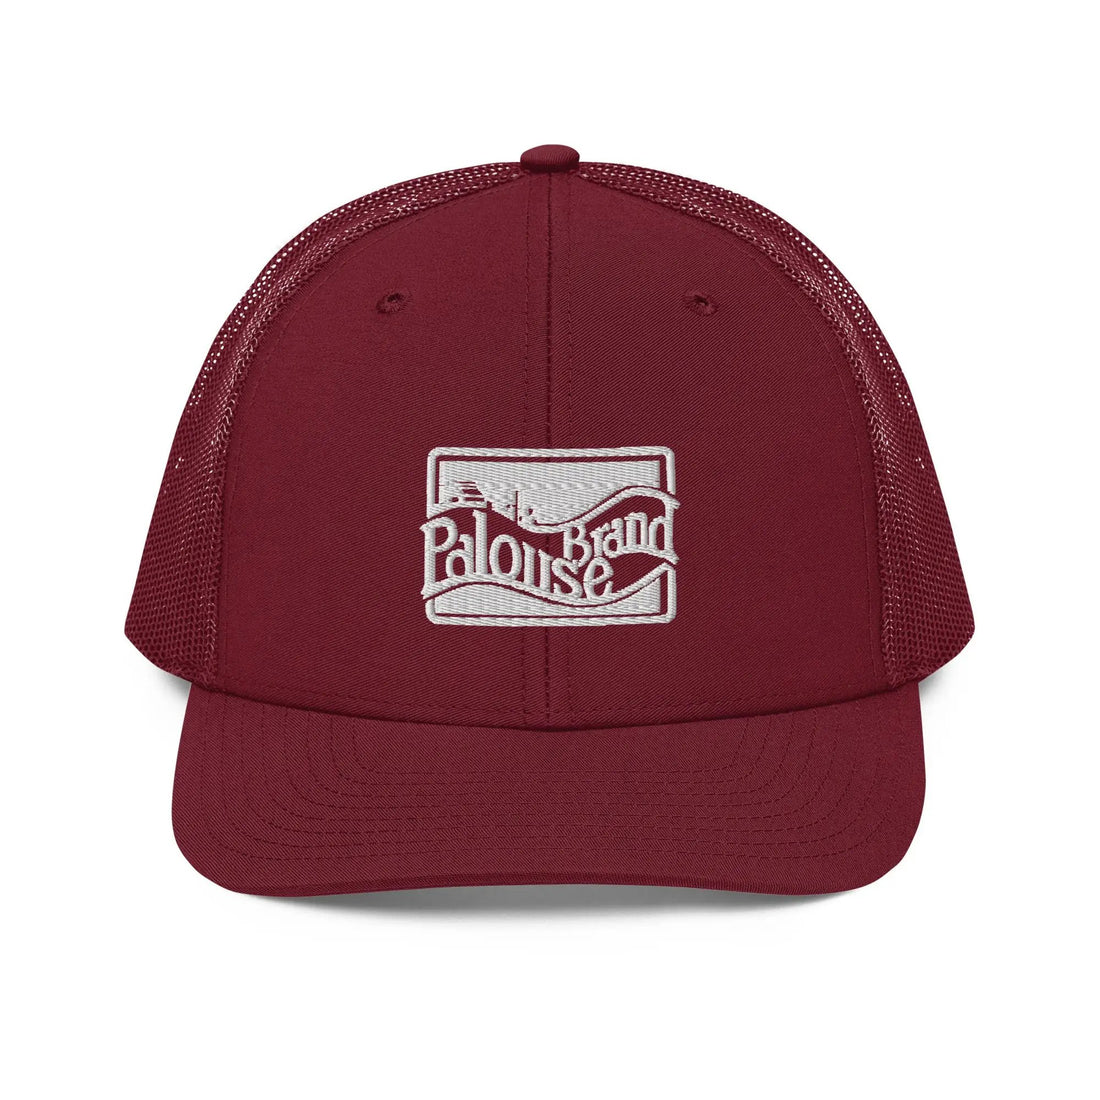 a maroon trucker hat with a white logo on the front